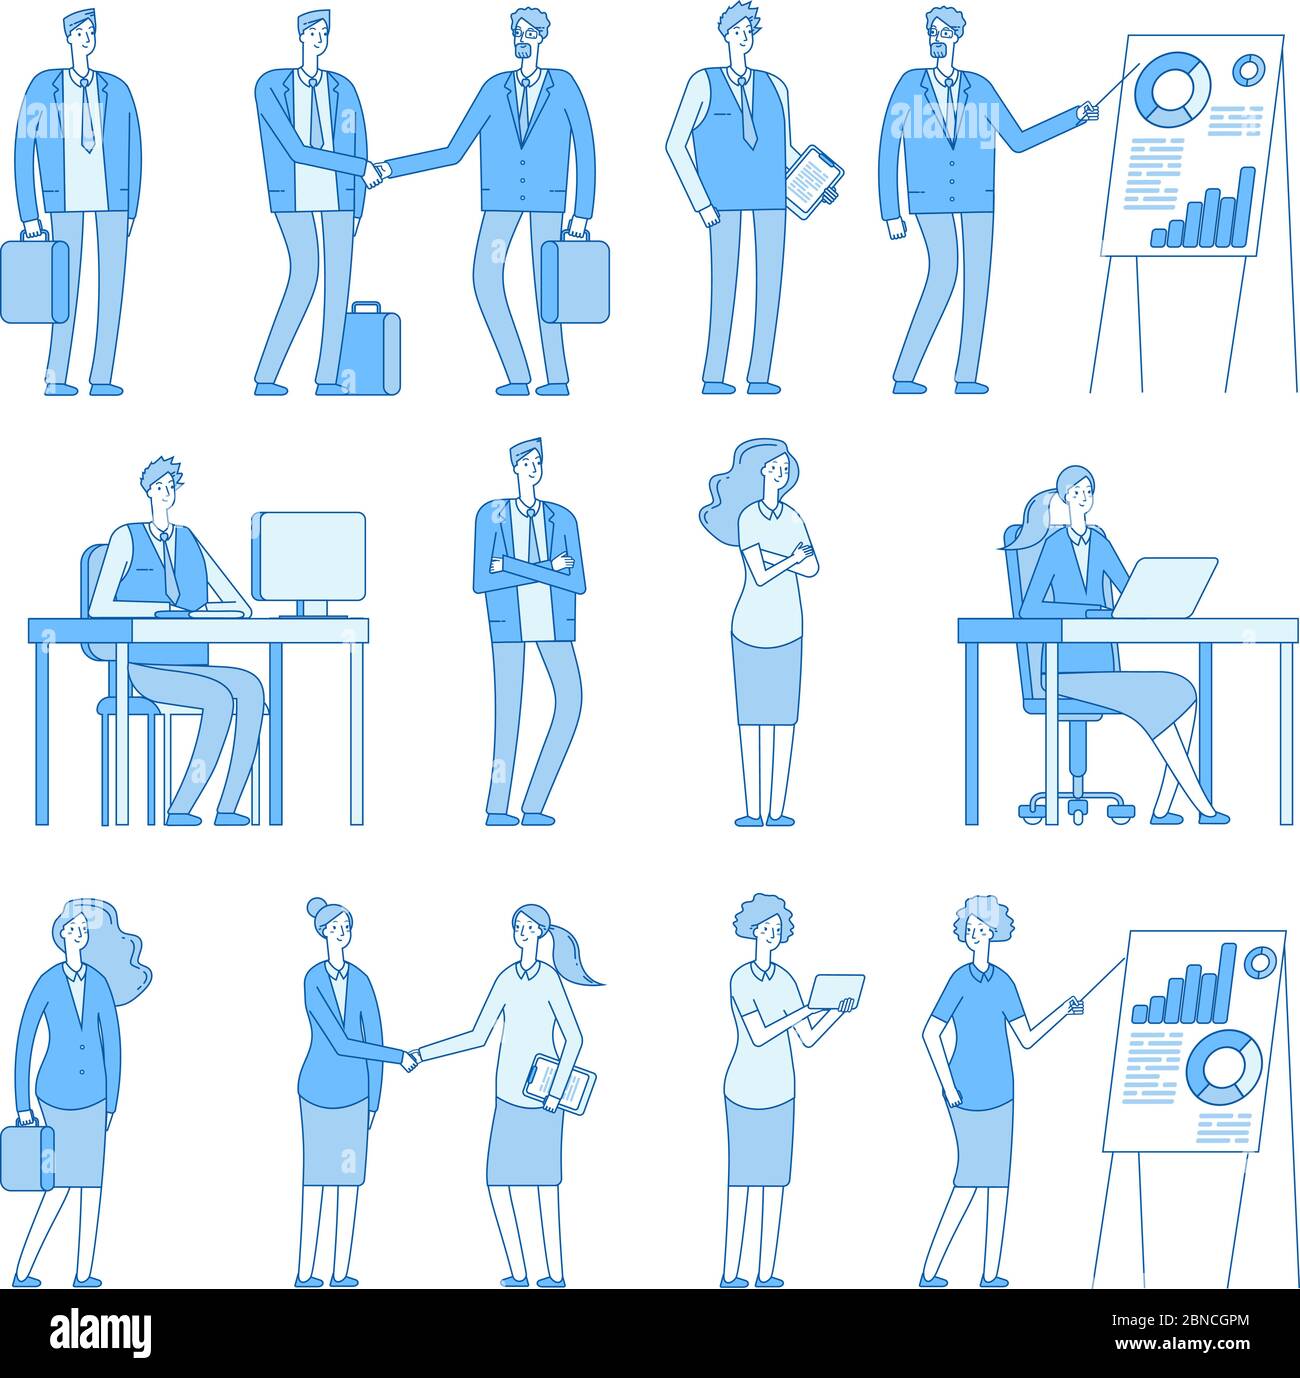 Business line people characters. Business man woman in corporate office, professional people vector set. Illustration of professional corporate office Stock Vector